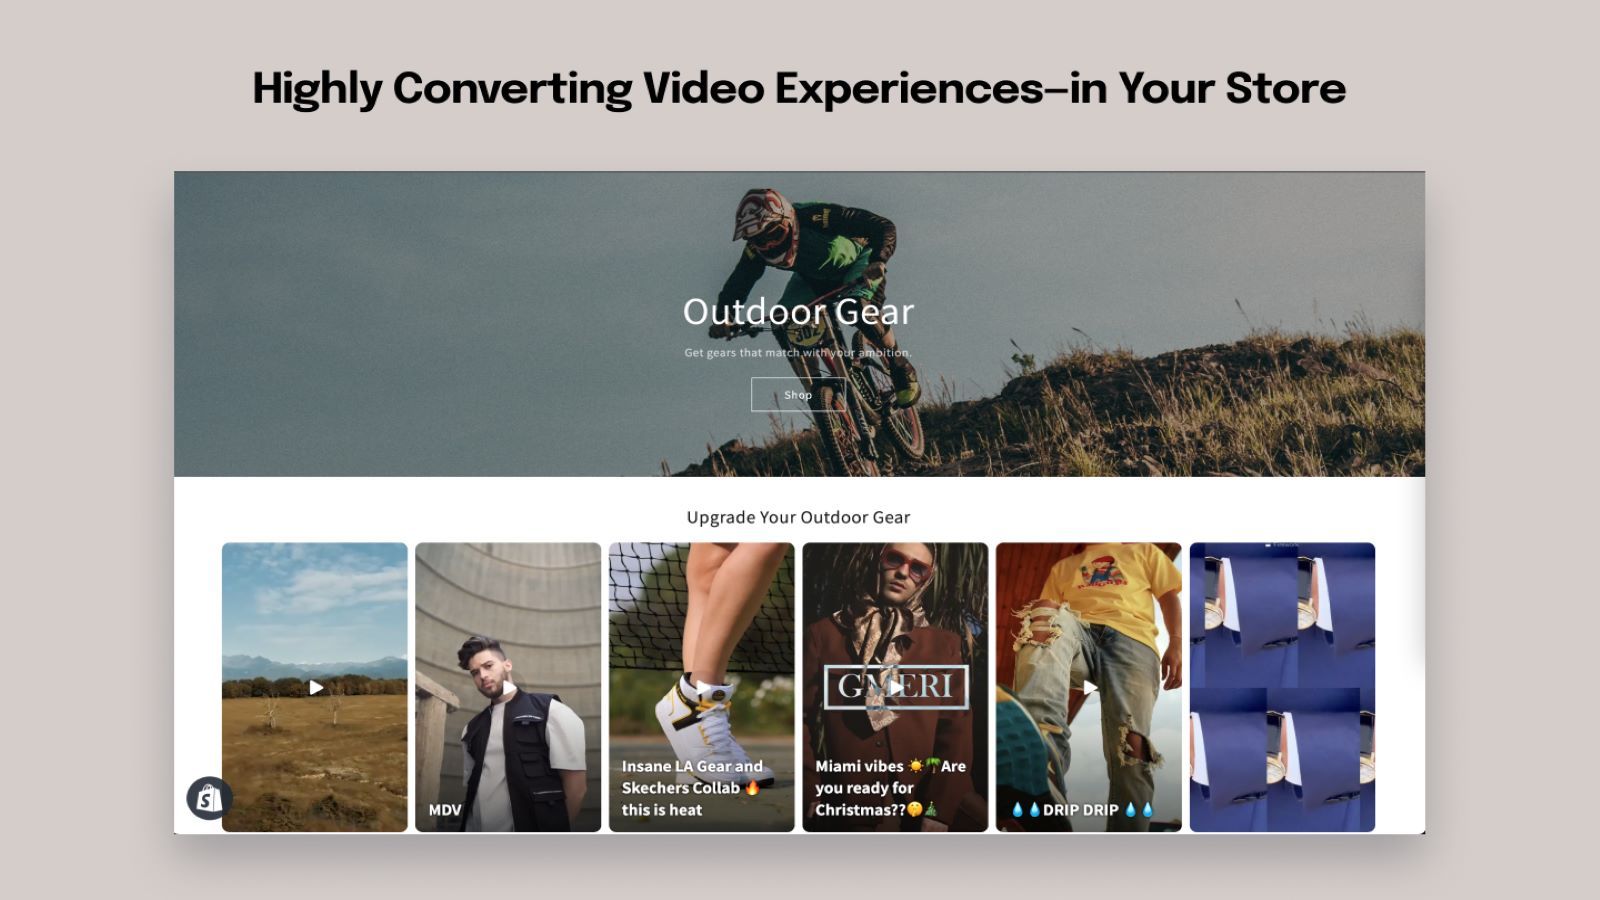 Highly Converting Video Experiences - in Your Store